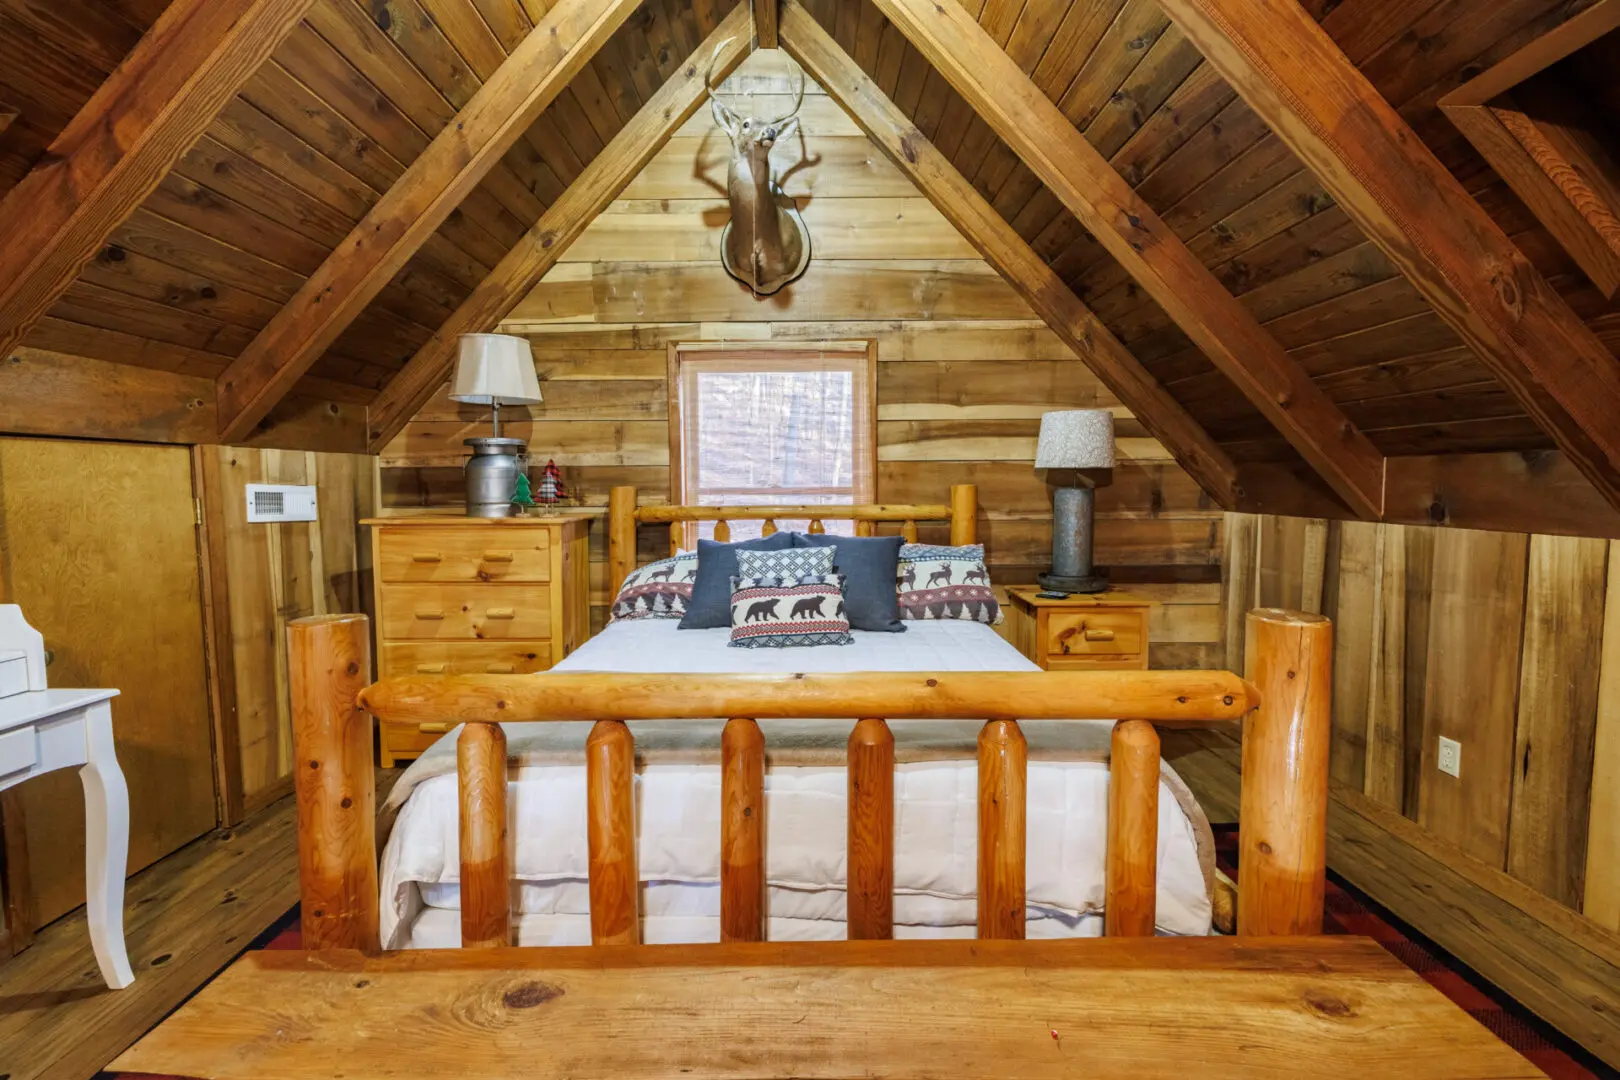 A cozy bedroom in a log cabin, perfect for a peaceful vacation getaway. The room features a comfortable bed and rustic decor, highlighted by a majestic deer head hanging proudly on the wall.